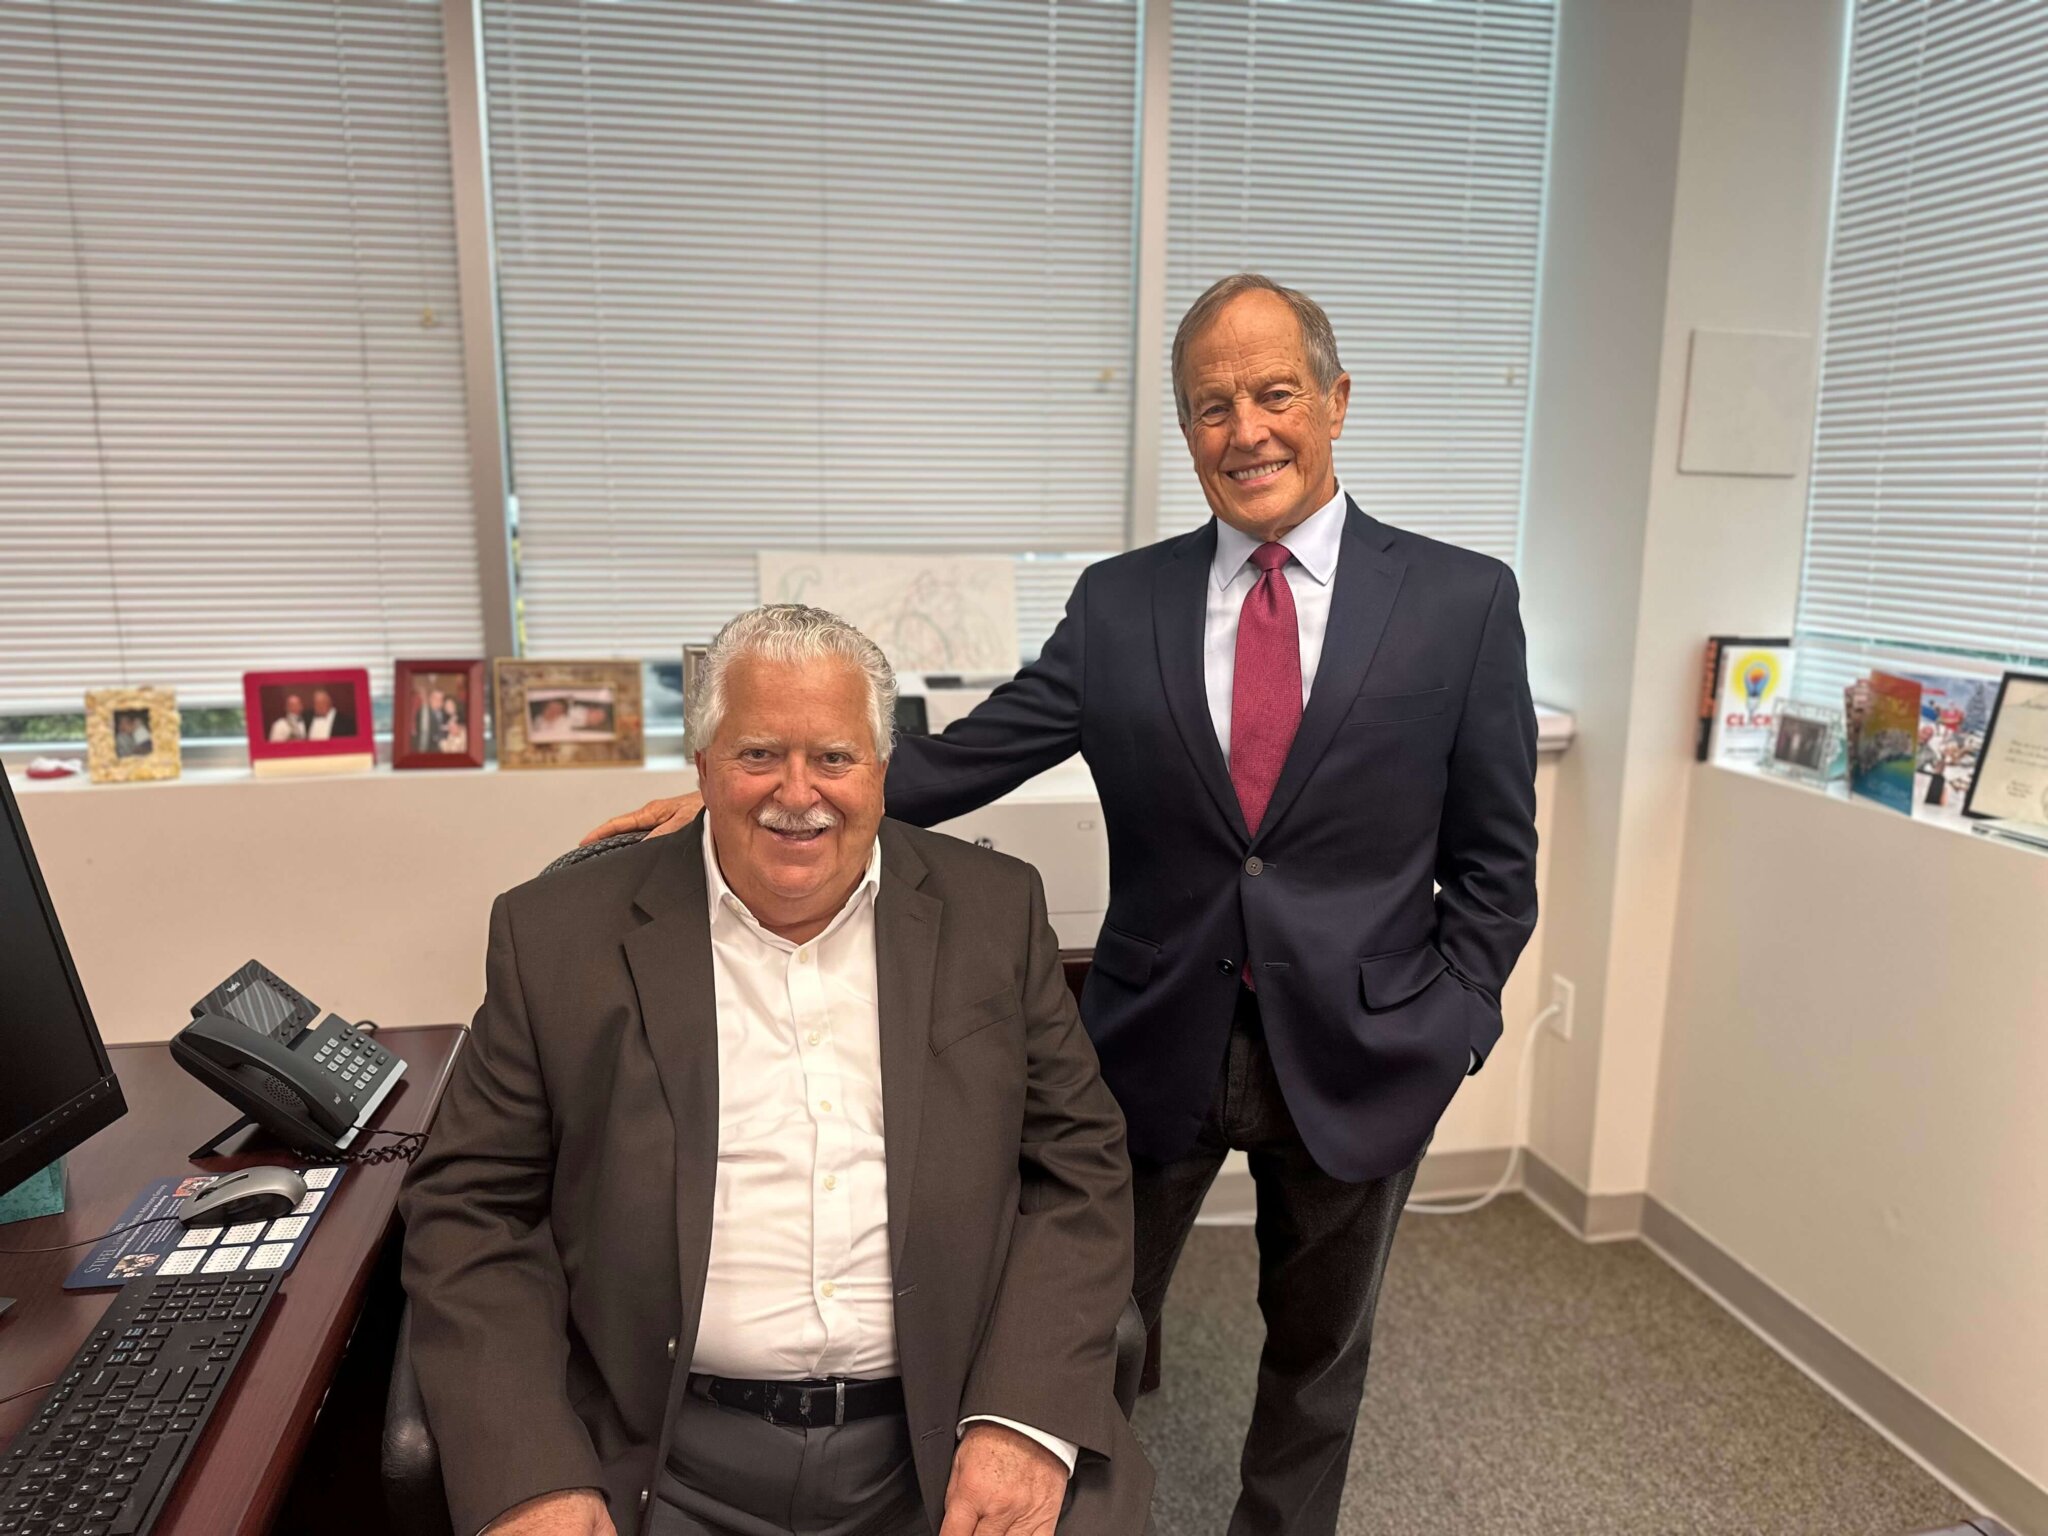 RISE Life Services Executive Director Charles Evdos with Board President Gregory Blass